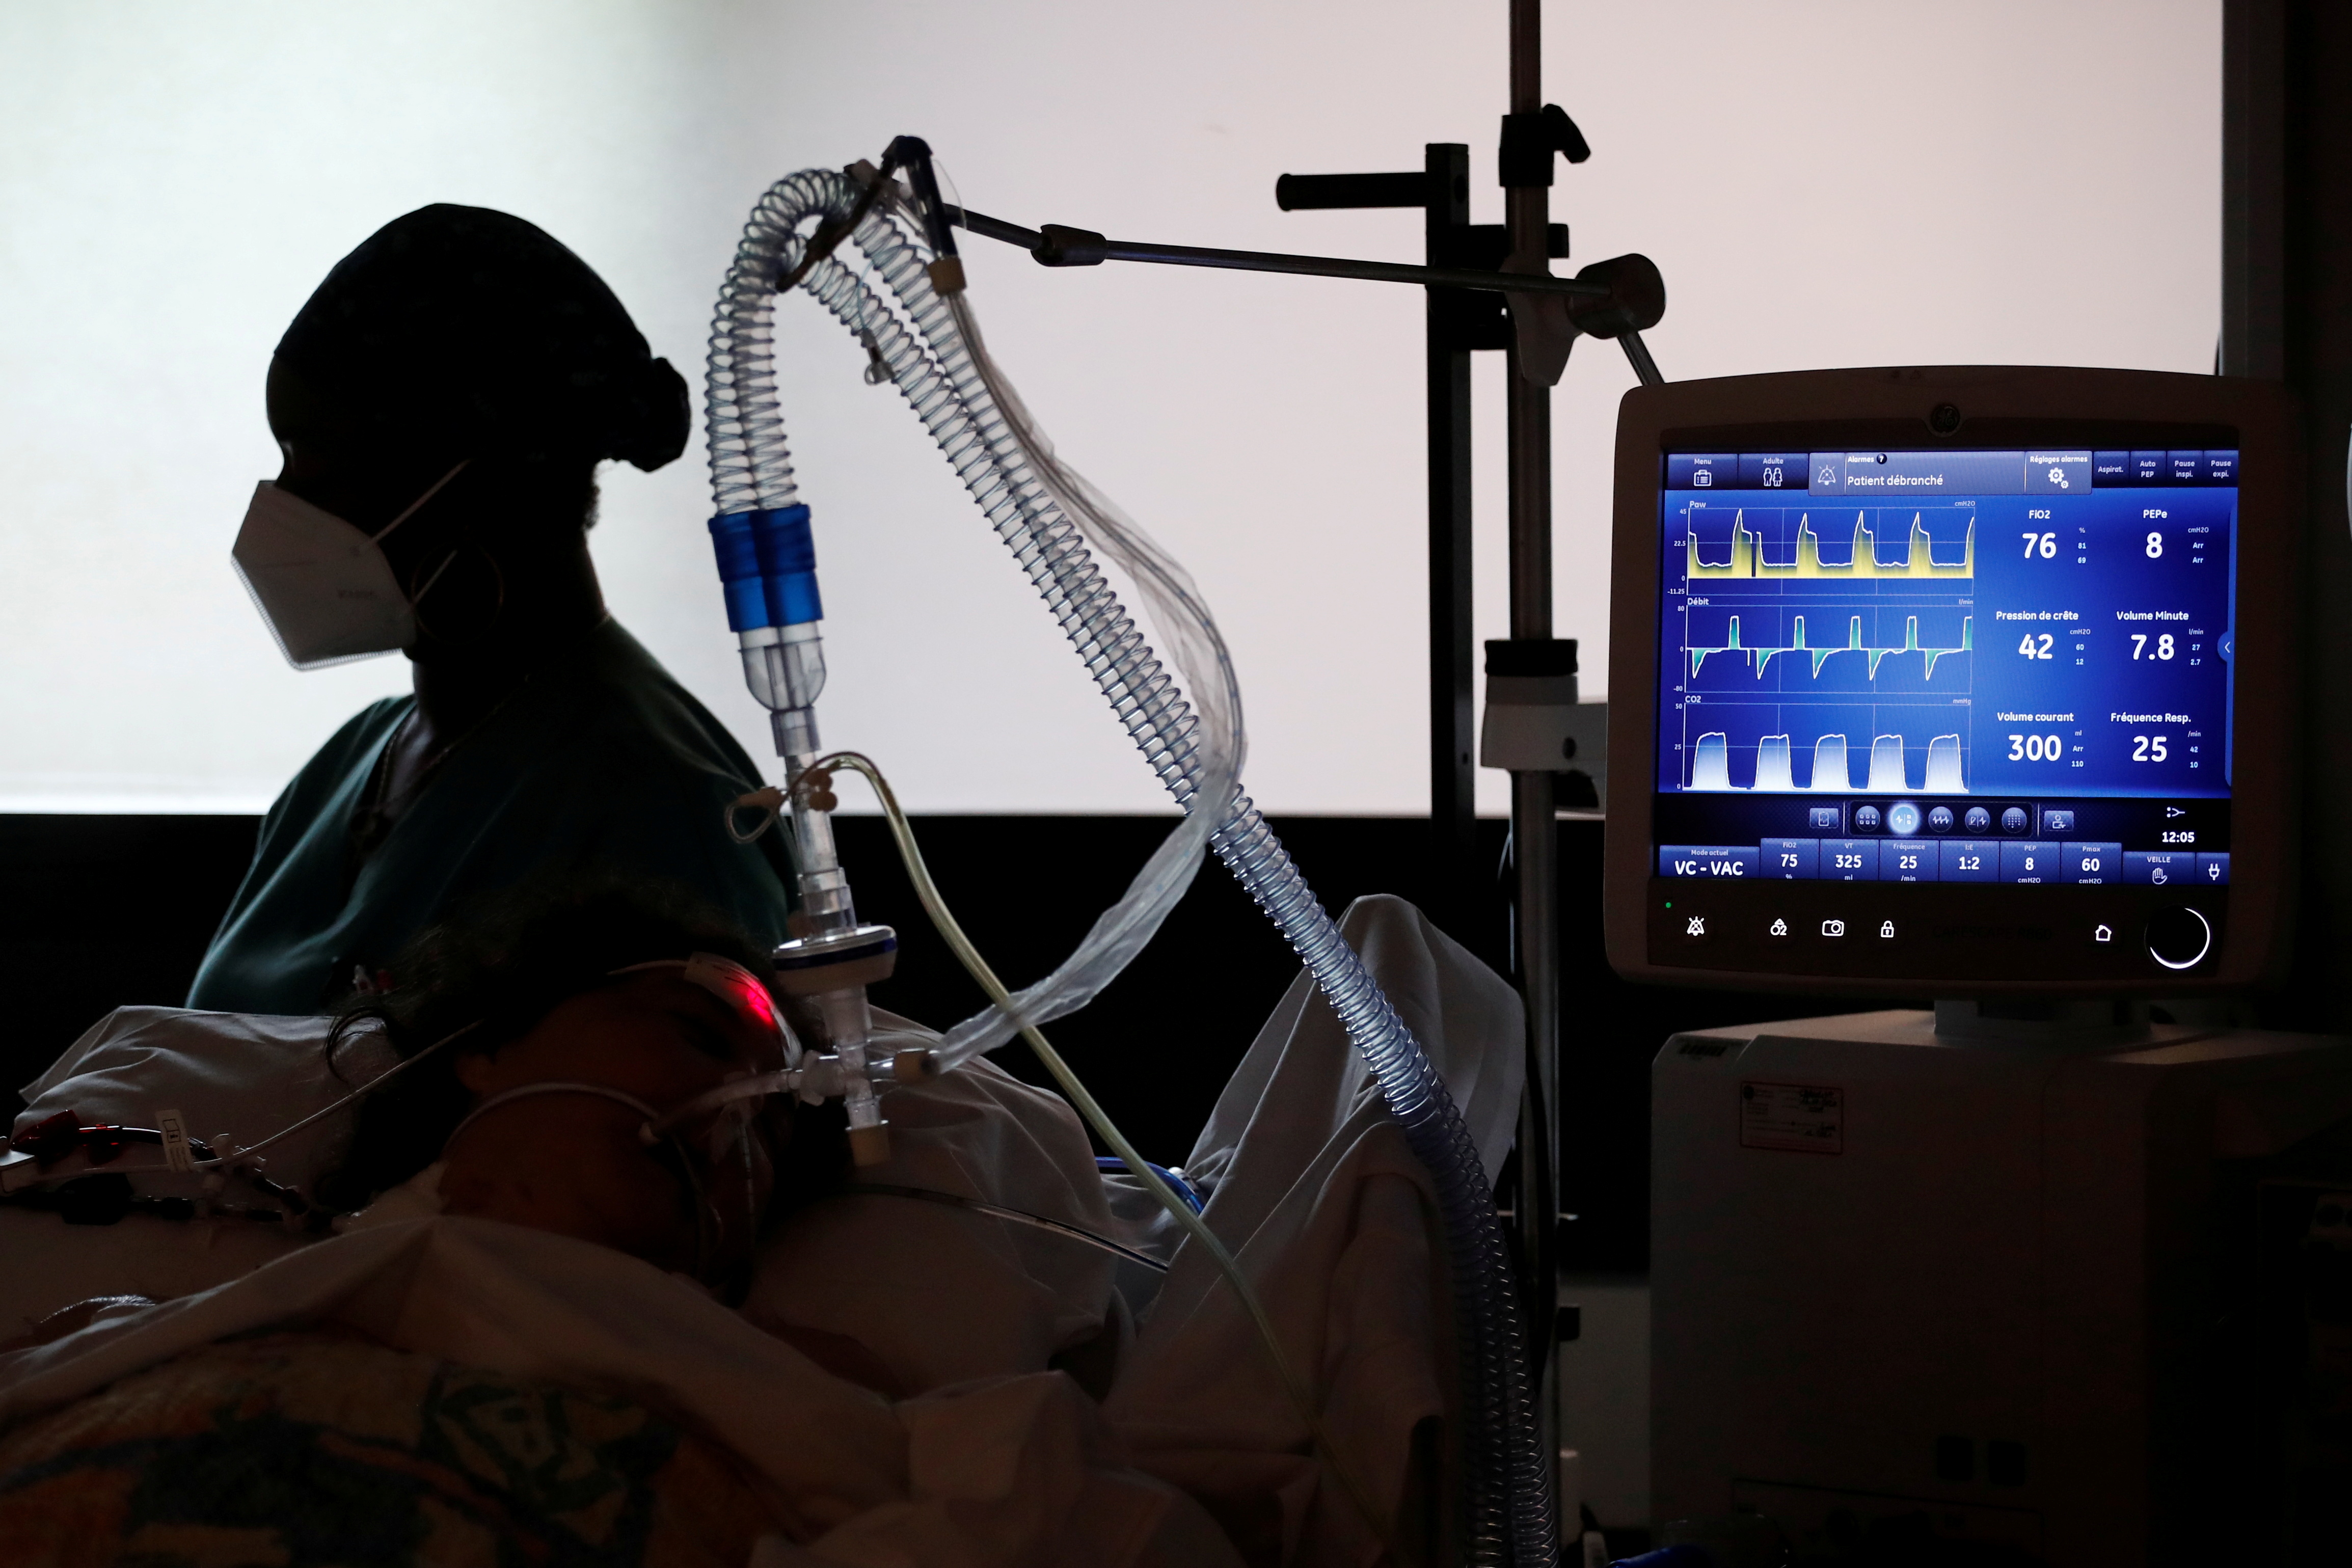 A COVID-19 patient connected to a ventilator tube in the Intensive Care Unit (ICU) at the Centre Cardiologique du Nord private hospital in Saint-Denis, near Paris, amid the coronavirus disease pandemic in France, May 4